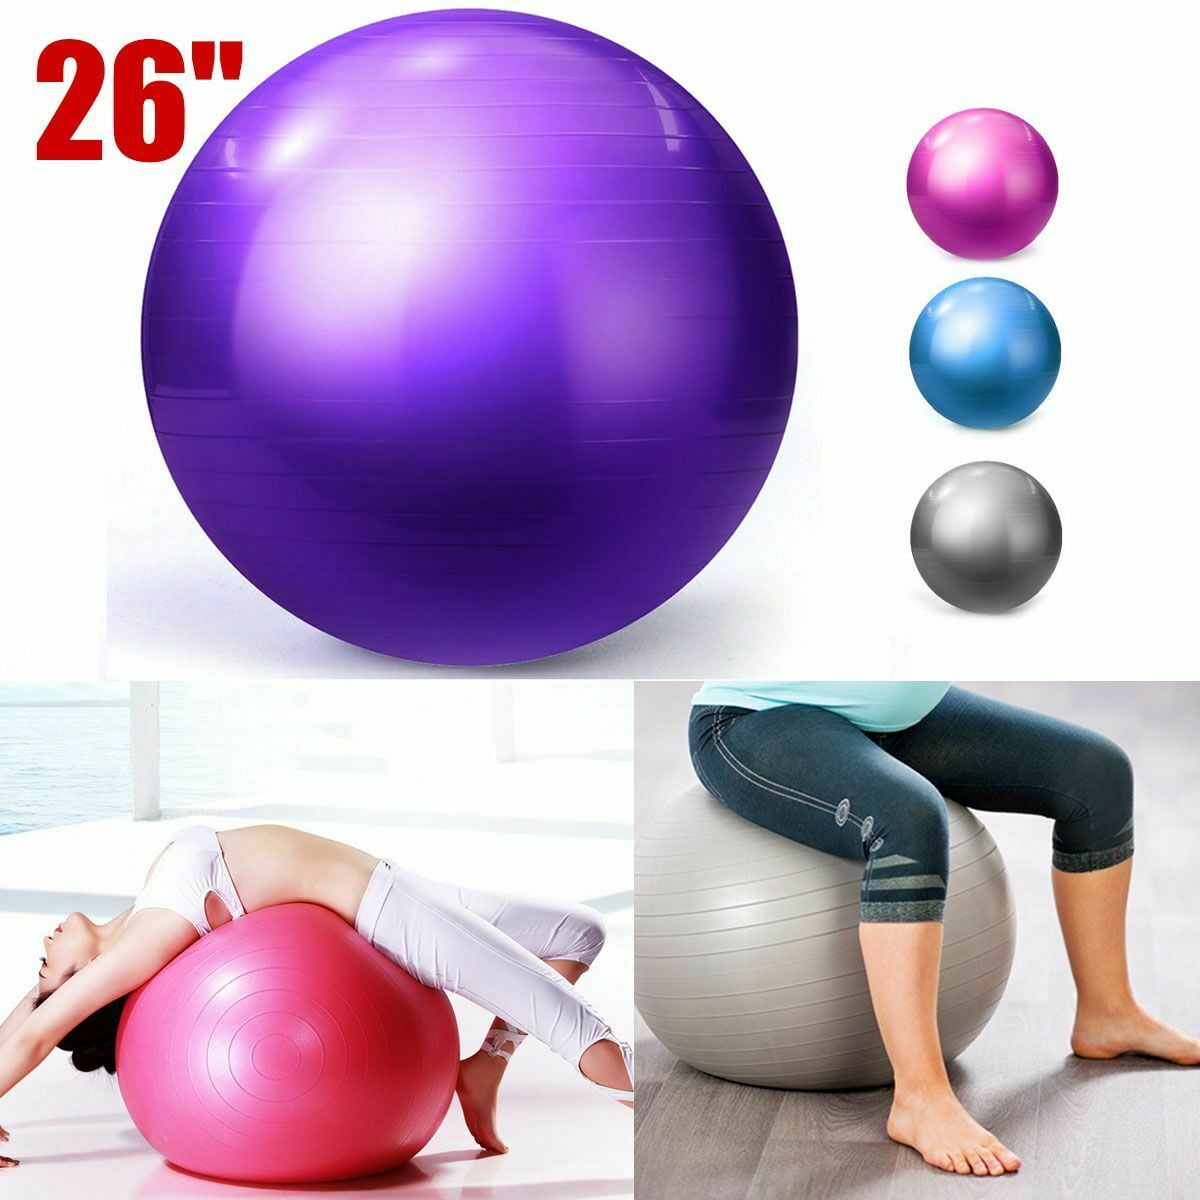 OUNONA 85cm 1000g Professional Anti Burst Stability Yoga Ball Thicken  Balancing Devcie Exercise Tool for Fitness Gym Workouts with Pump Air Clamp  Stopper (Purple) 